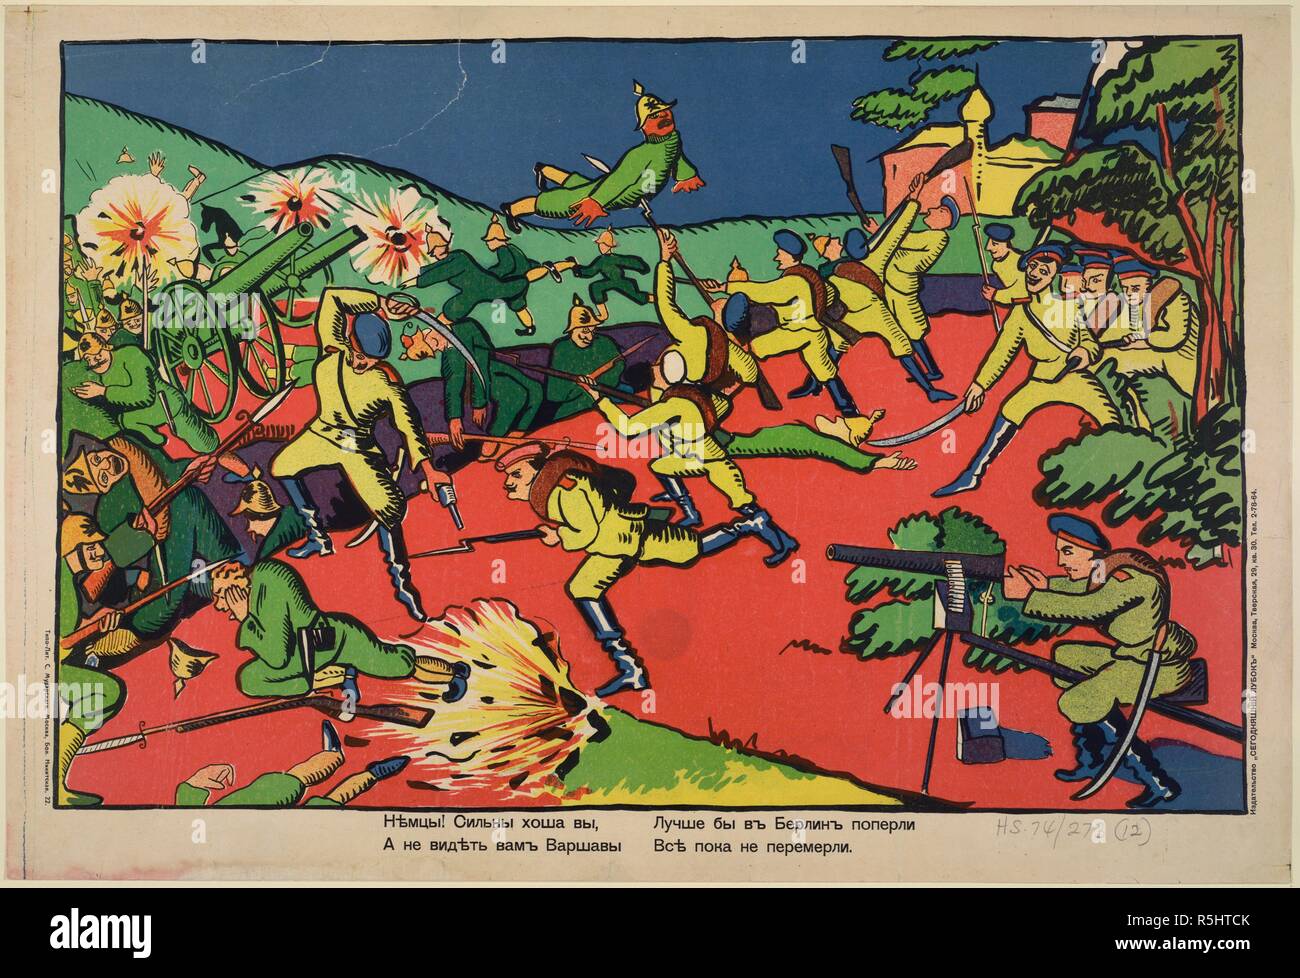 Nemtsy! Sil'ny khosha vy, A ne videt' vam Varshavy... 'Germans, although you are strong, you won't get Warsaw!. You better go back to Berlin, while some of you are still alive'. Russian posters of World War I. Moskva: Segodniashnii lubok. S.Mukharskii, Publishing House, Moscow. 1914. Source: HS.74/273.(12). Language: Russian. Author: Maiakovskii, Vladimir Vladimirovich. Stock Photo